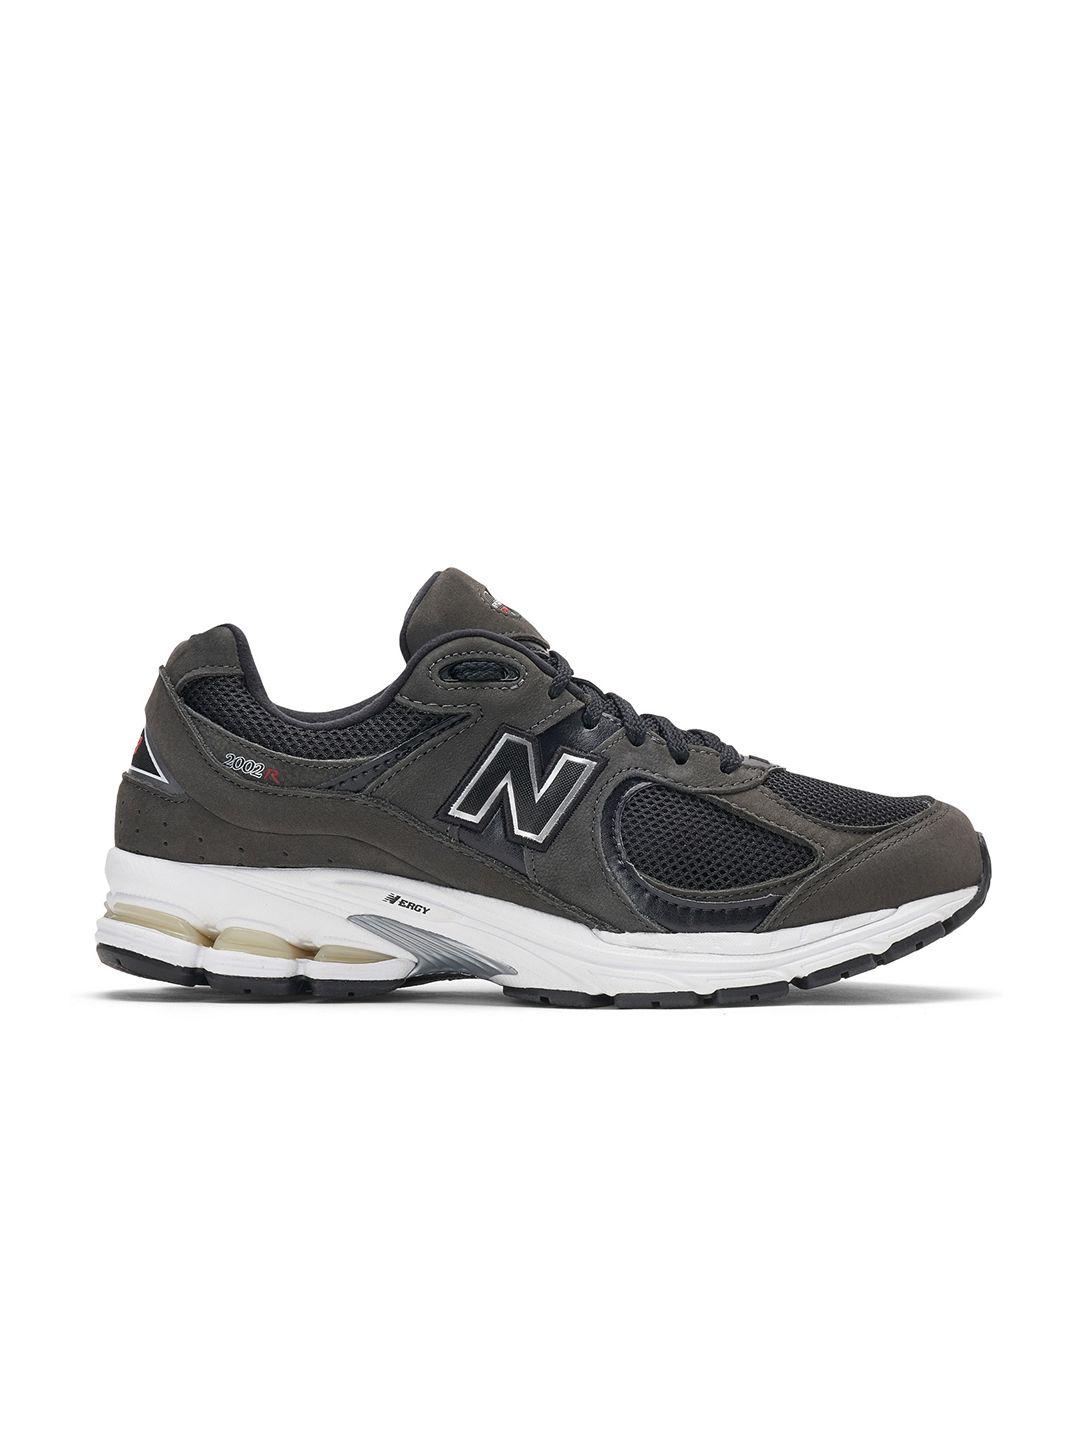 New Balance Men Woven Design Training or Gym Shoes